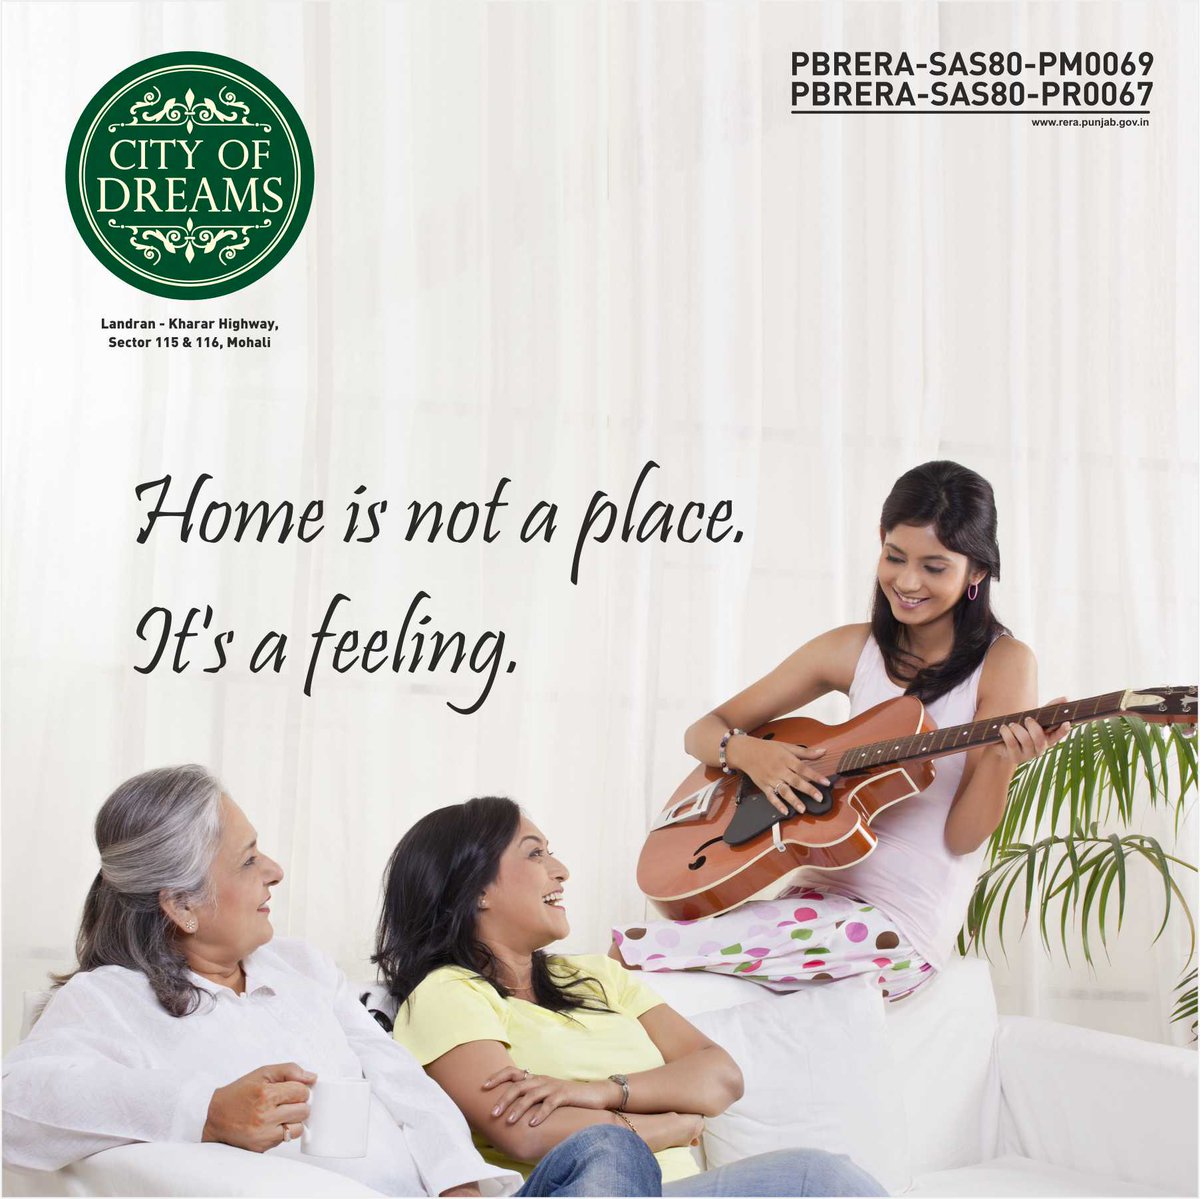 Home is not a place,it's a feeling..

#sbpgroup #gatewayofdreams #housingpark #2and3bhkapartments #zirakpur #god #ownhome #home